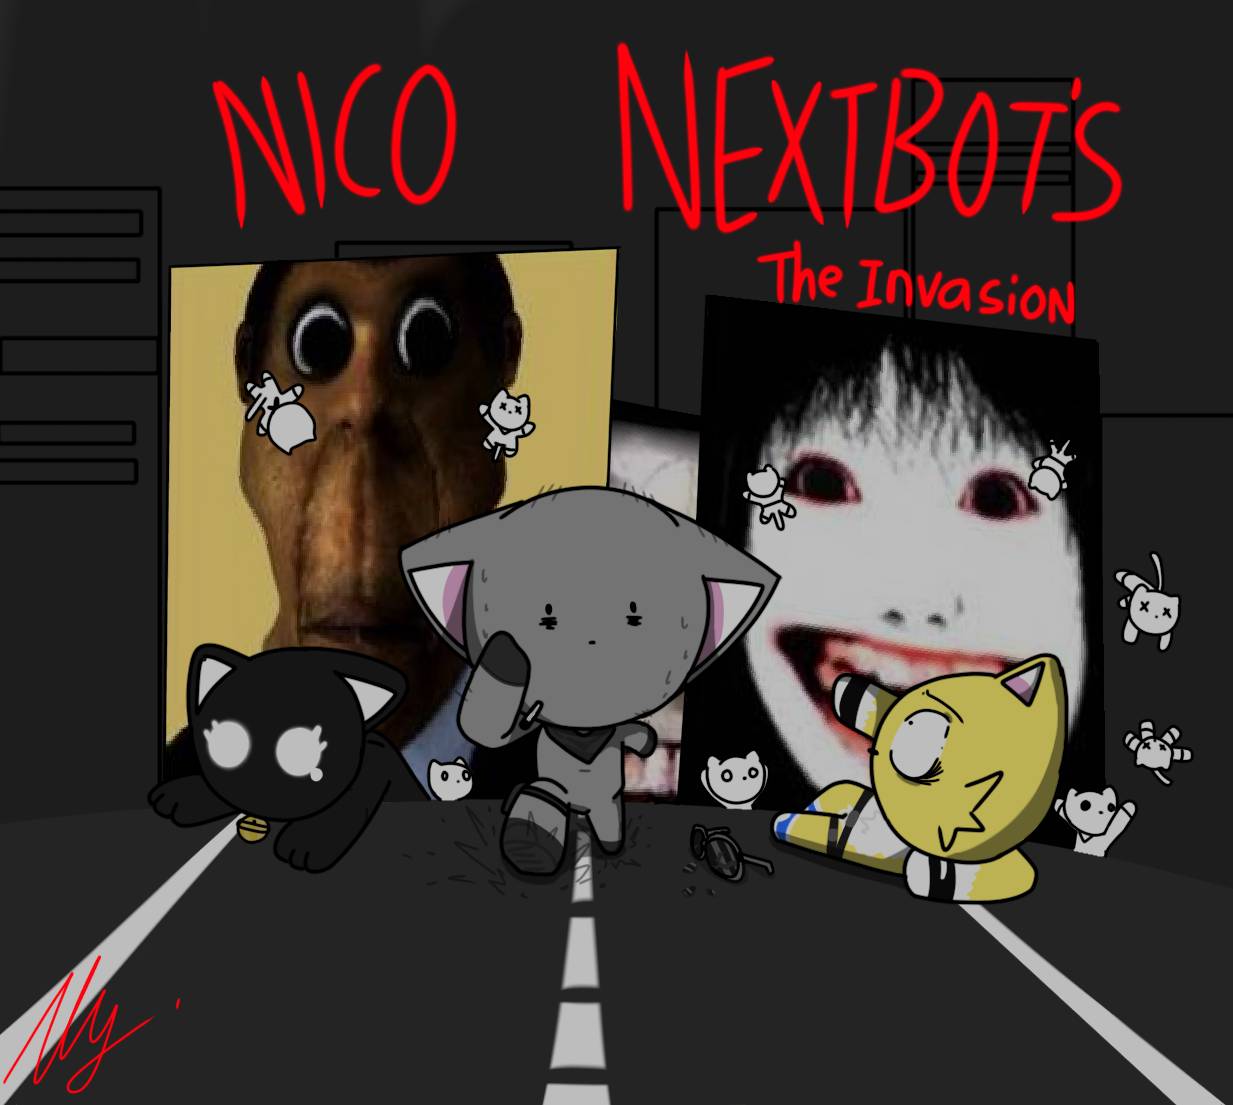 Another drawing of Nico's Nextbots by NelaTheCat on DeviantArt